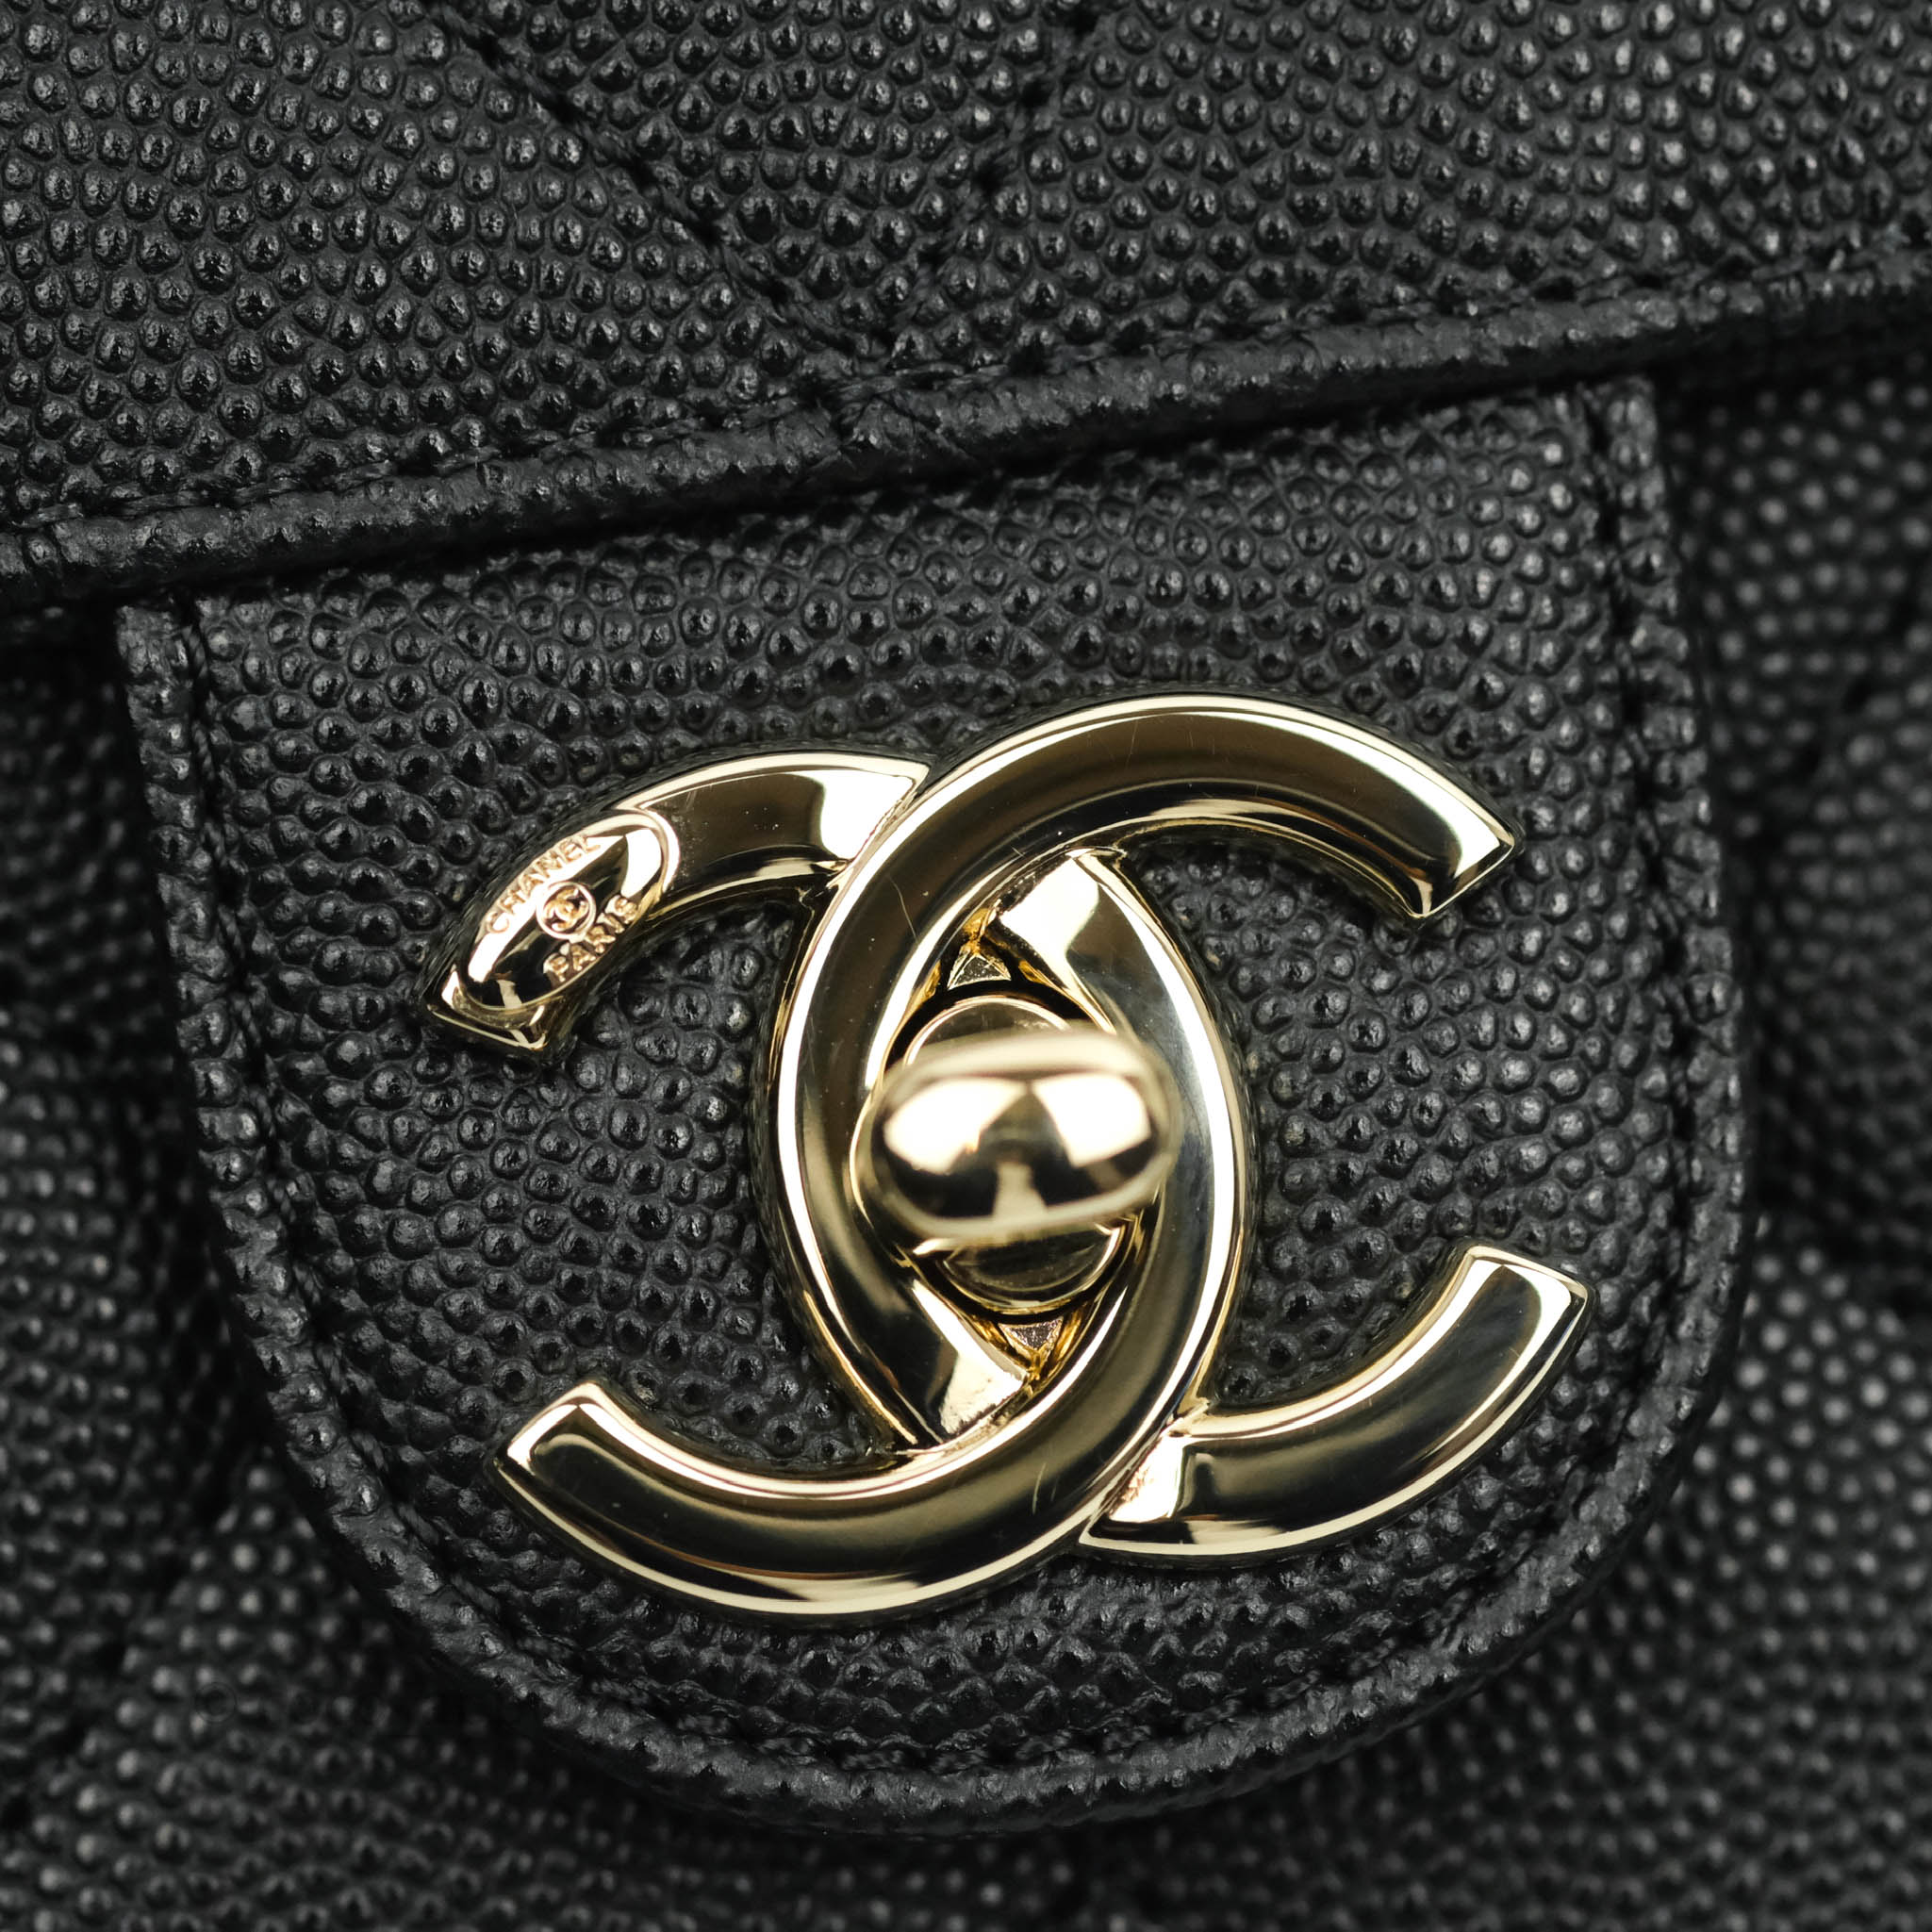 Chanel Quilted Like The Wallet Medium Flap Black Caviar Gold